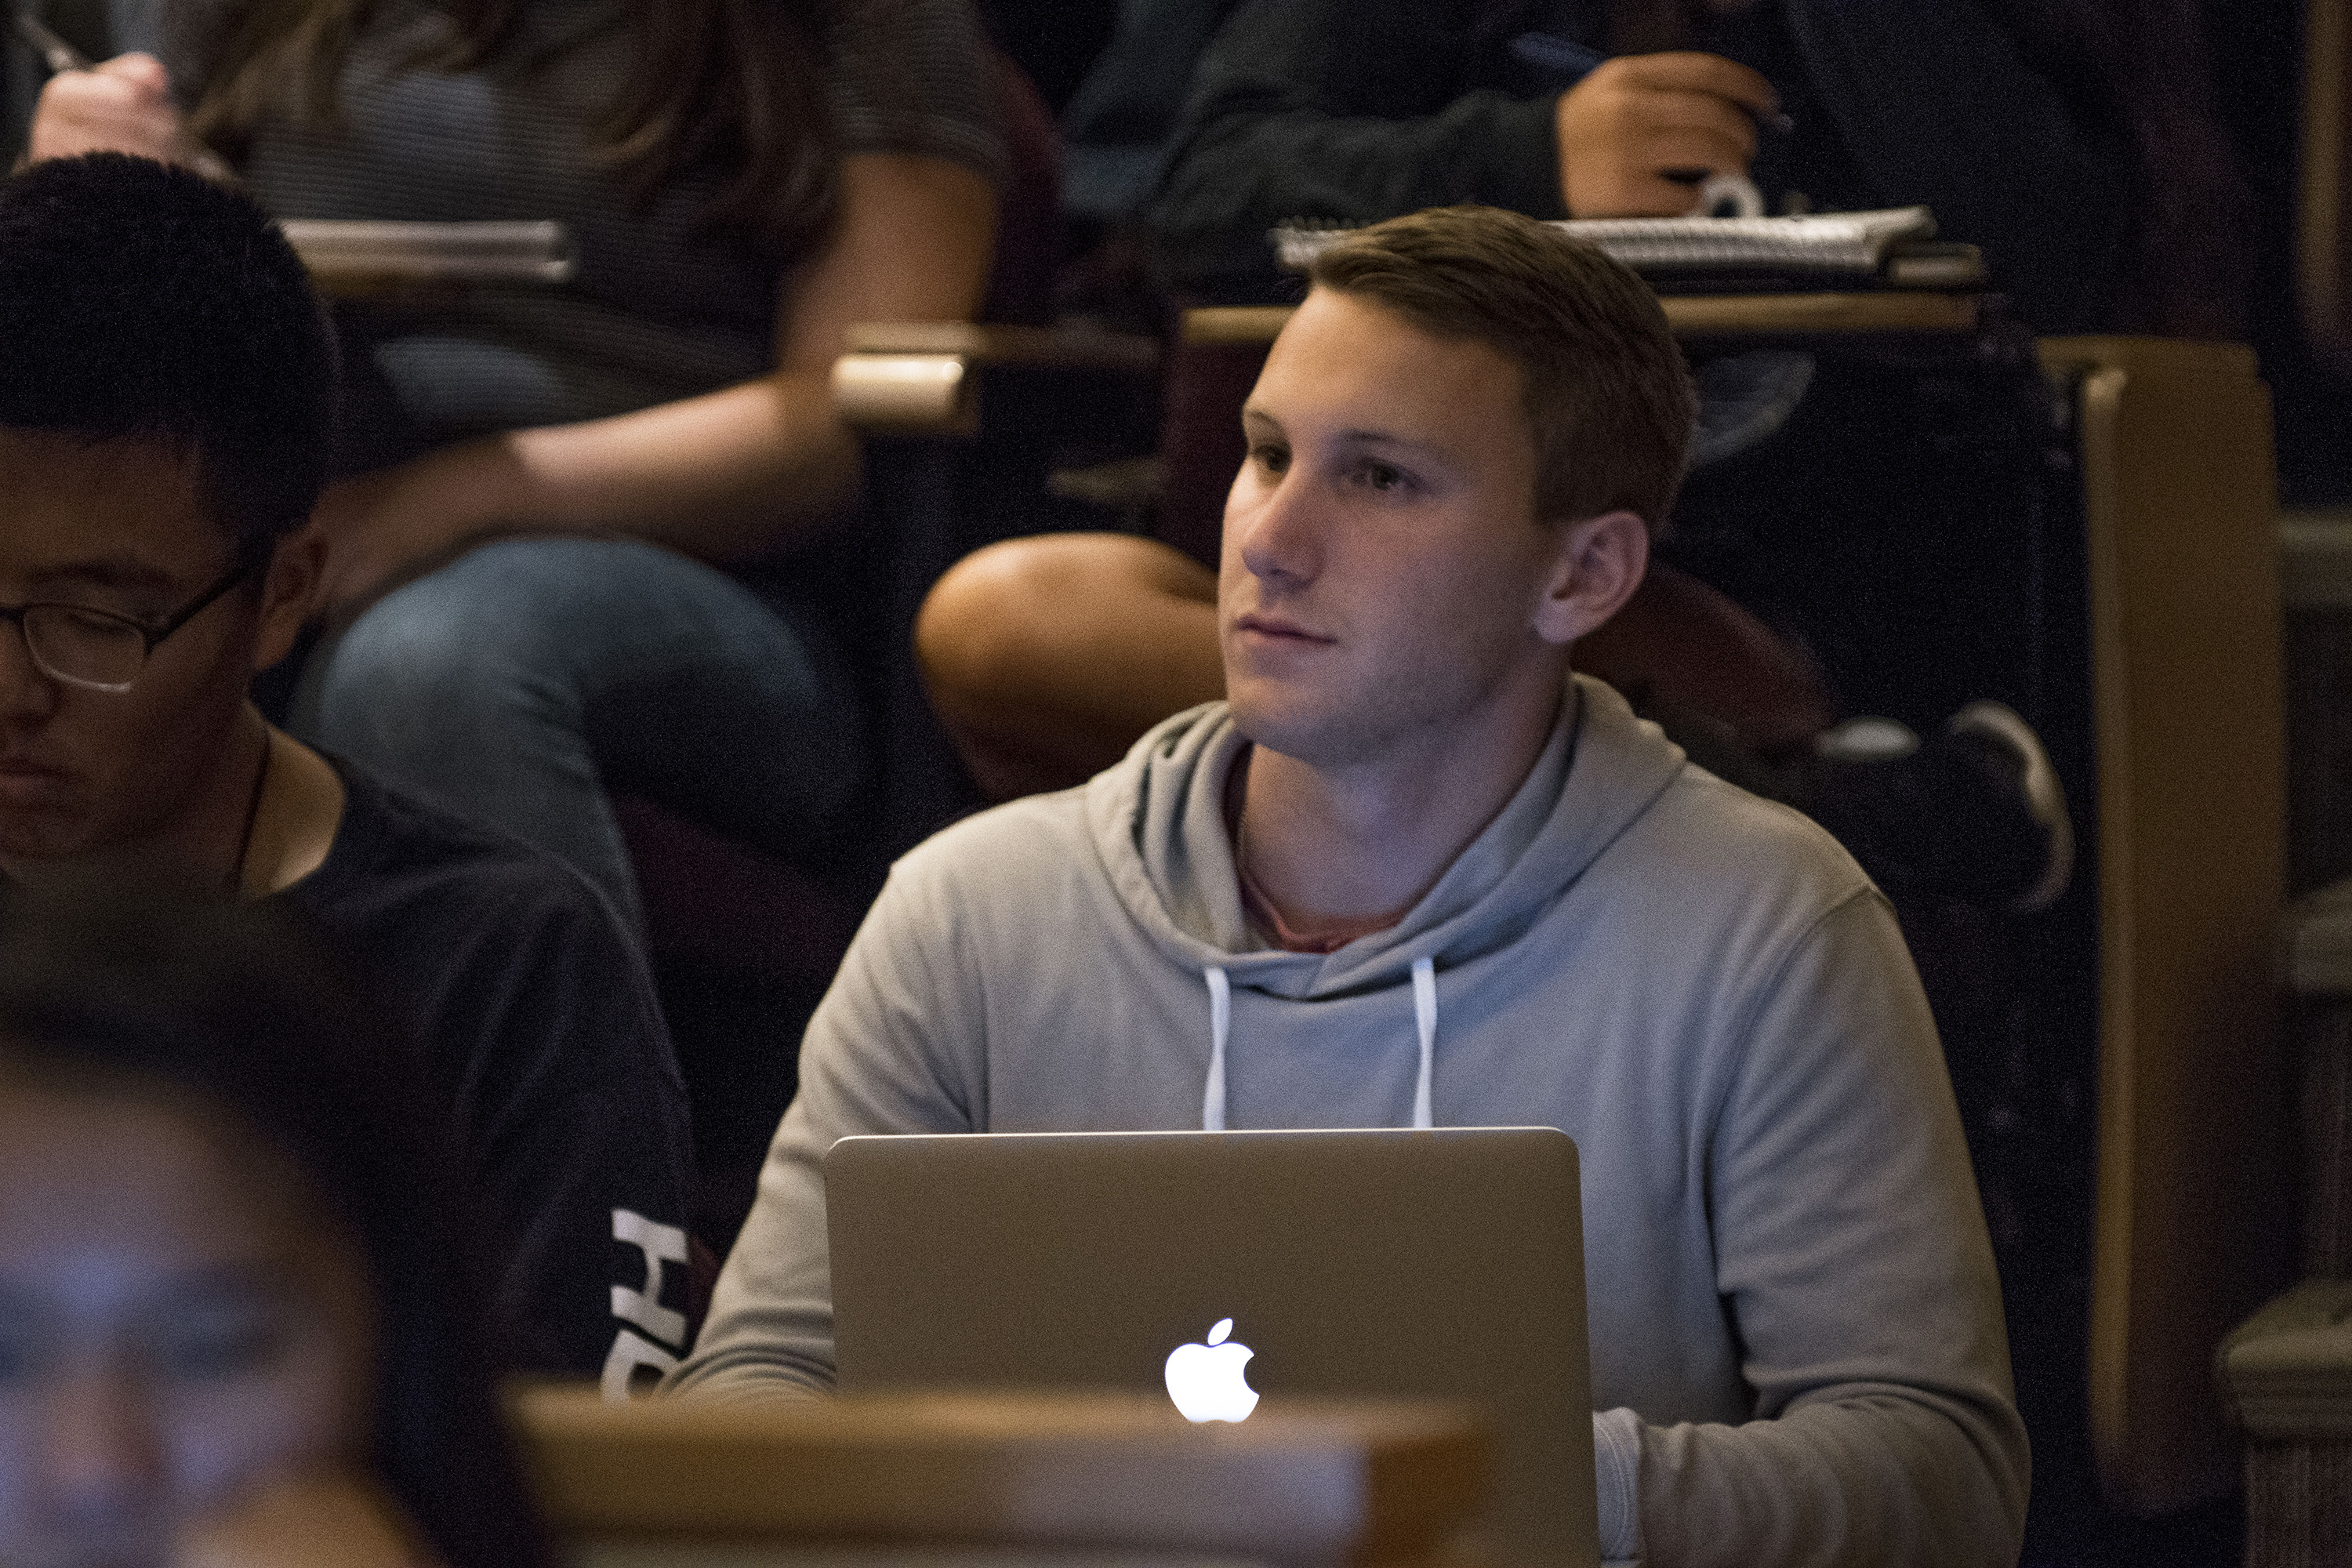 Scott Levene '17 (BUS), Men's Soccer Goalkeeper, attends a COMM 1000 lecture in Laurel Hall. Levene, who says he dreamed of being a UConn Husky since he was 5 years old, excels in the classroom as well as on the field. (Garrett Spahn/UConn Photo)